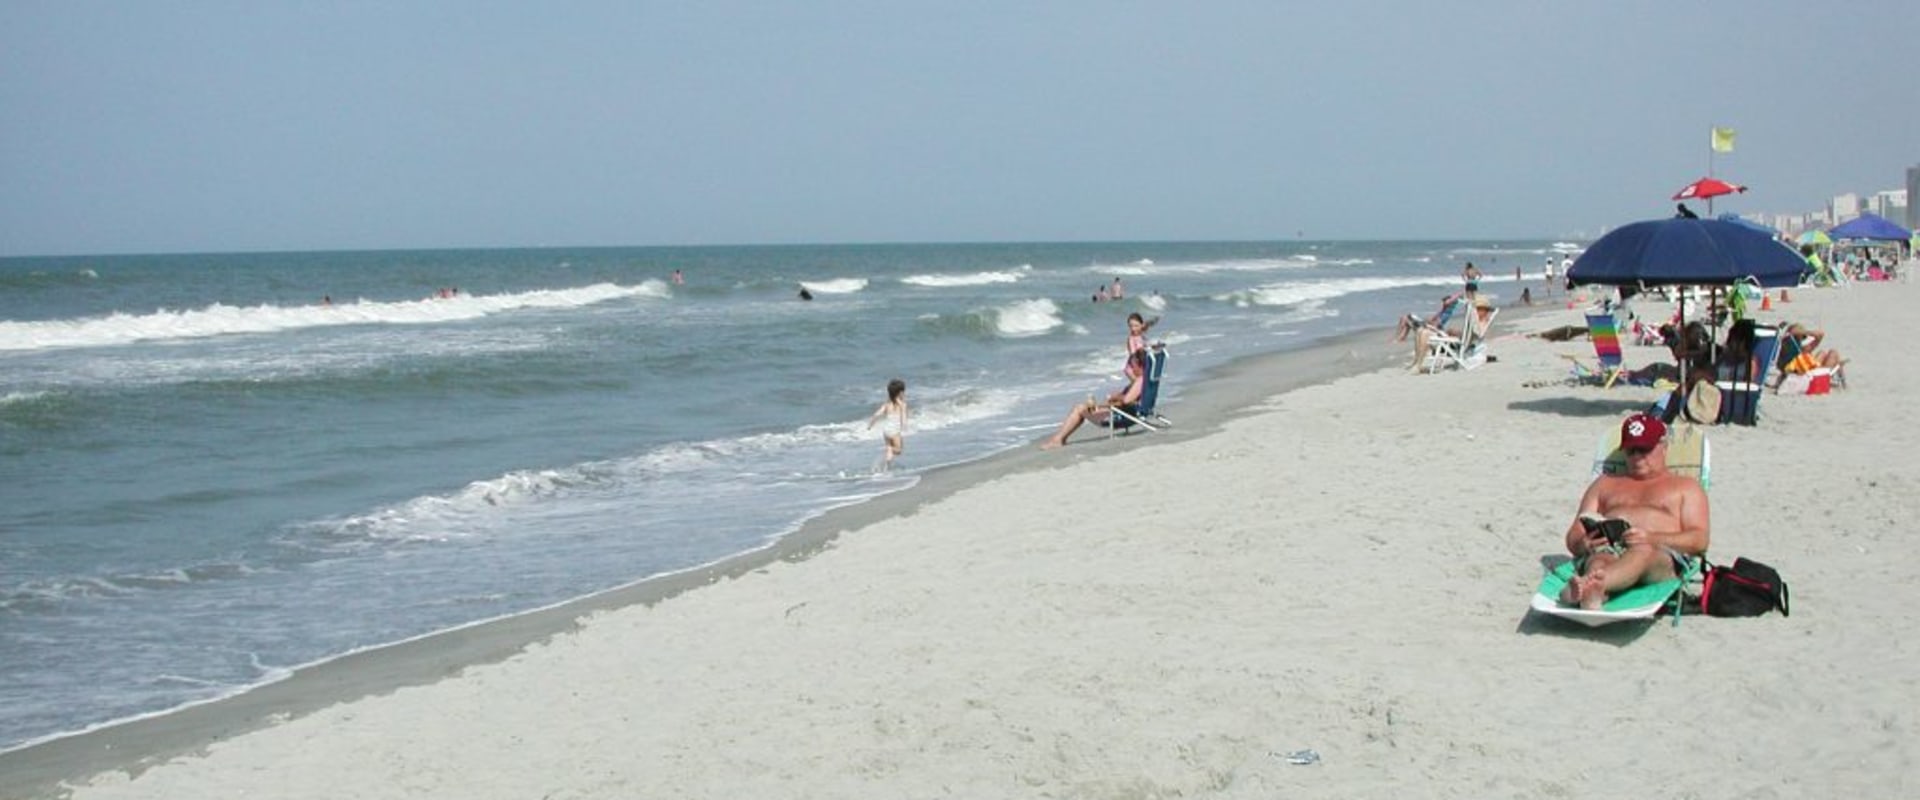 Is it better to stay in north myrtle beach or myrtle beach?